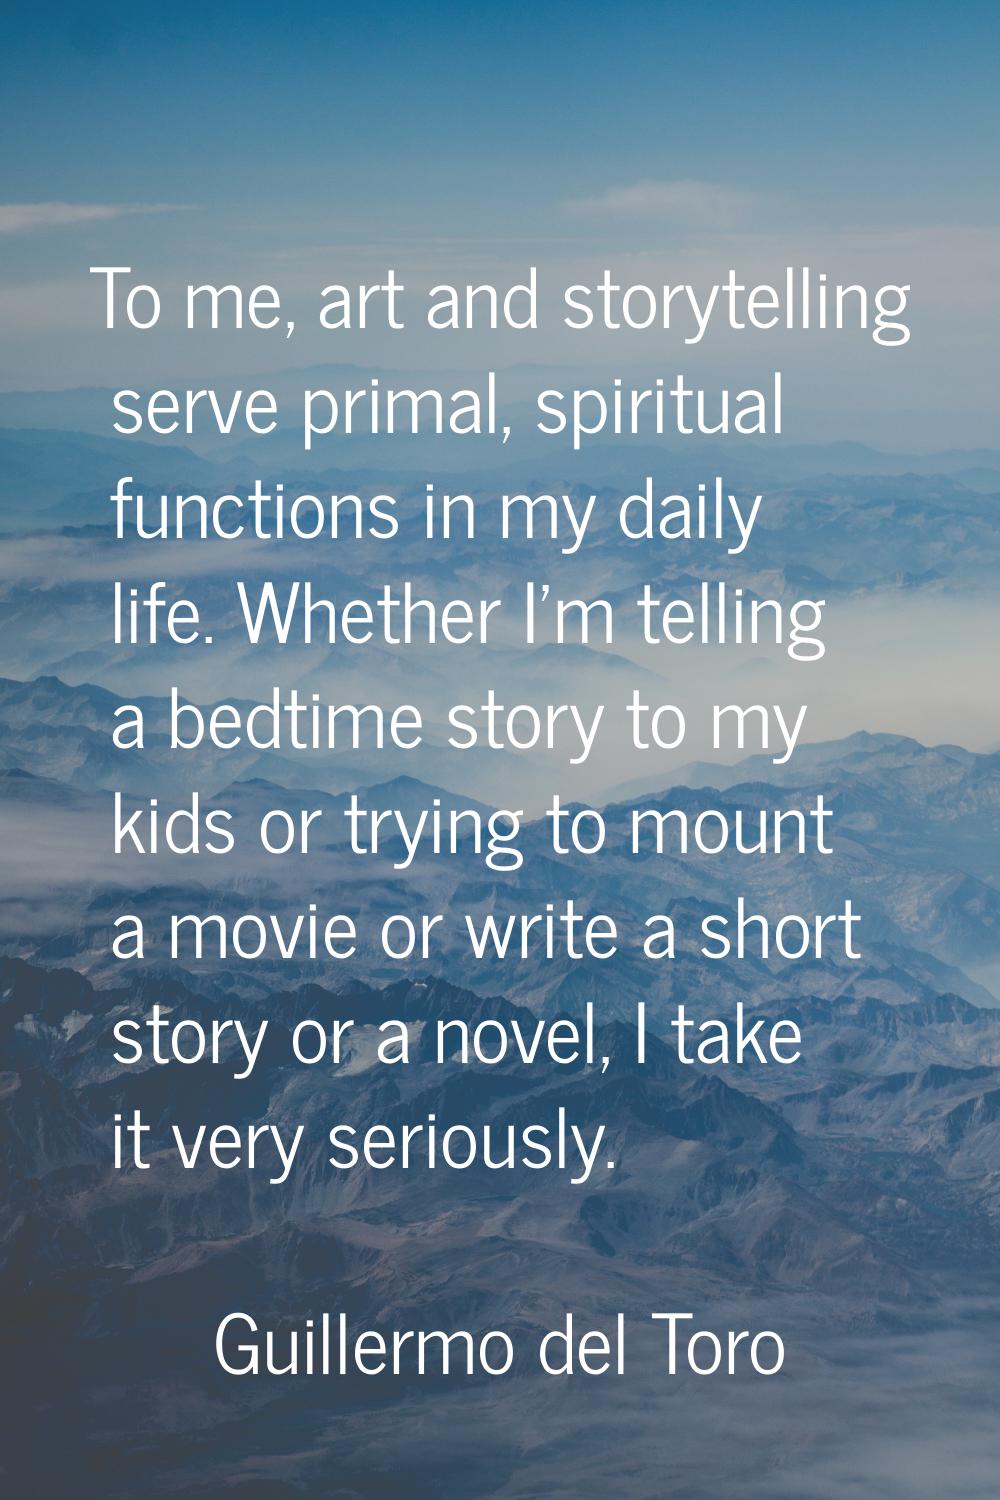 To me, art and storytelling serve primal, spiritual functions in my daily life. Whether I'm telling